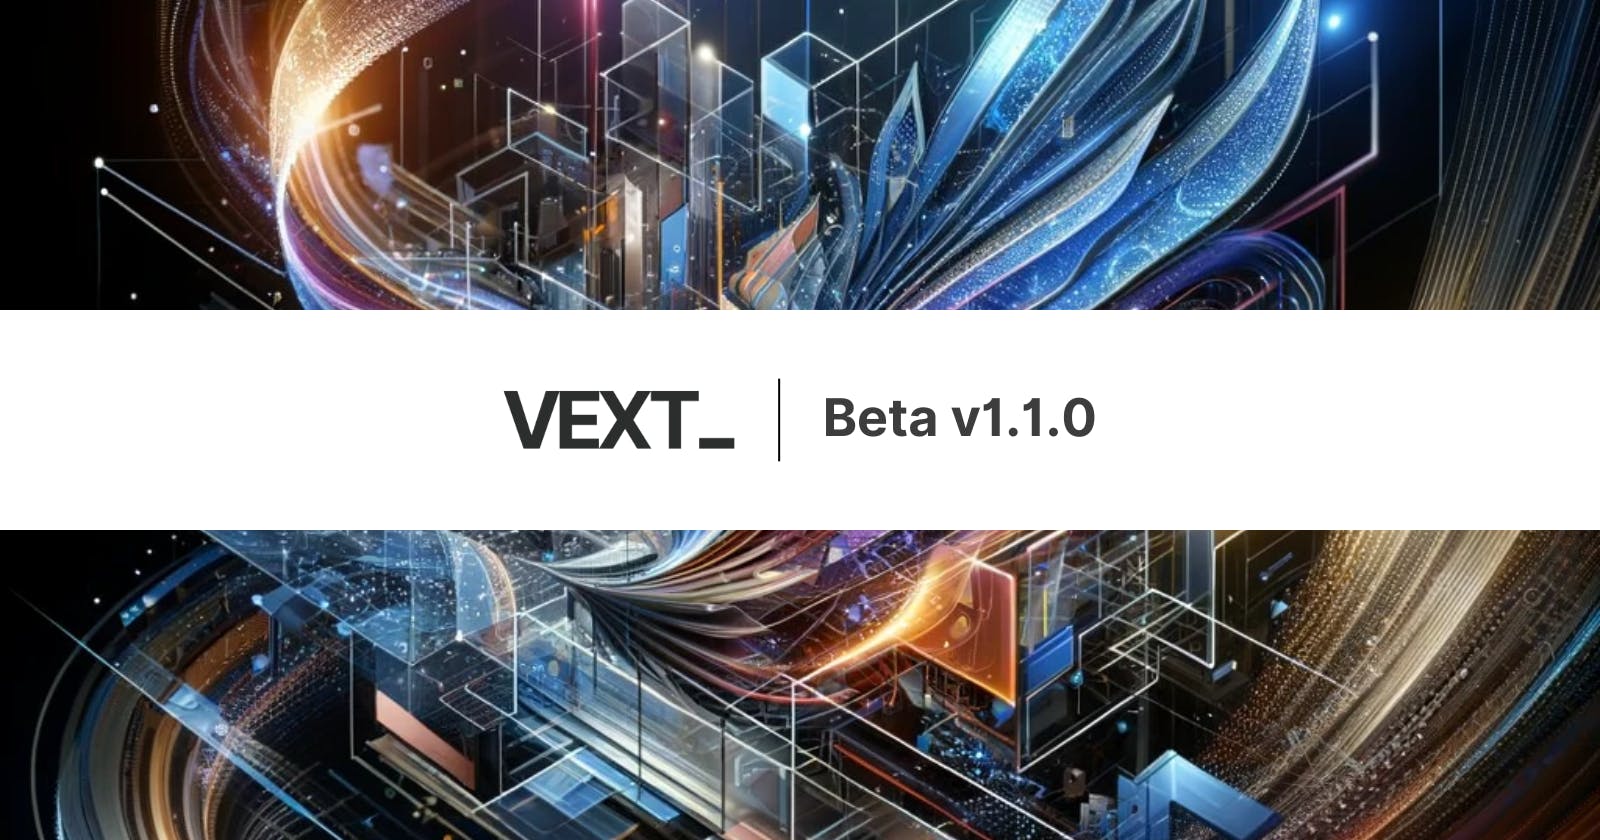 Welcome to the Vext Beta v1.1.0